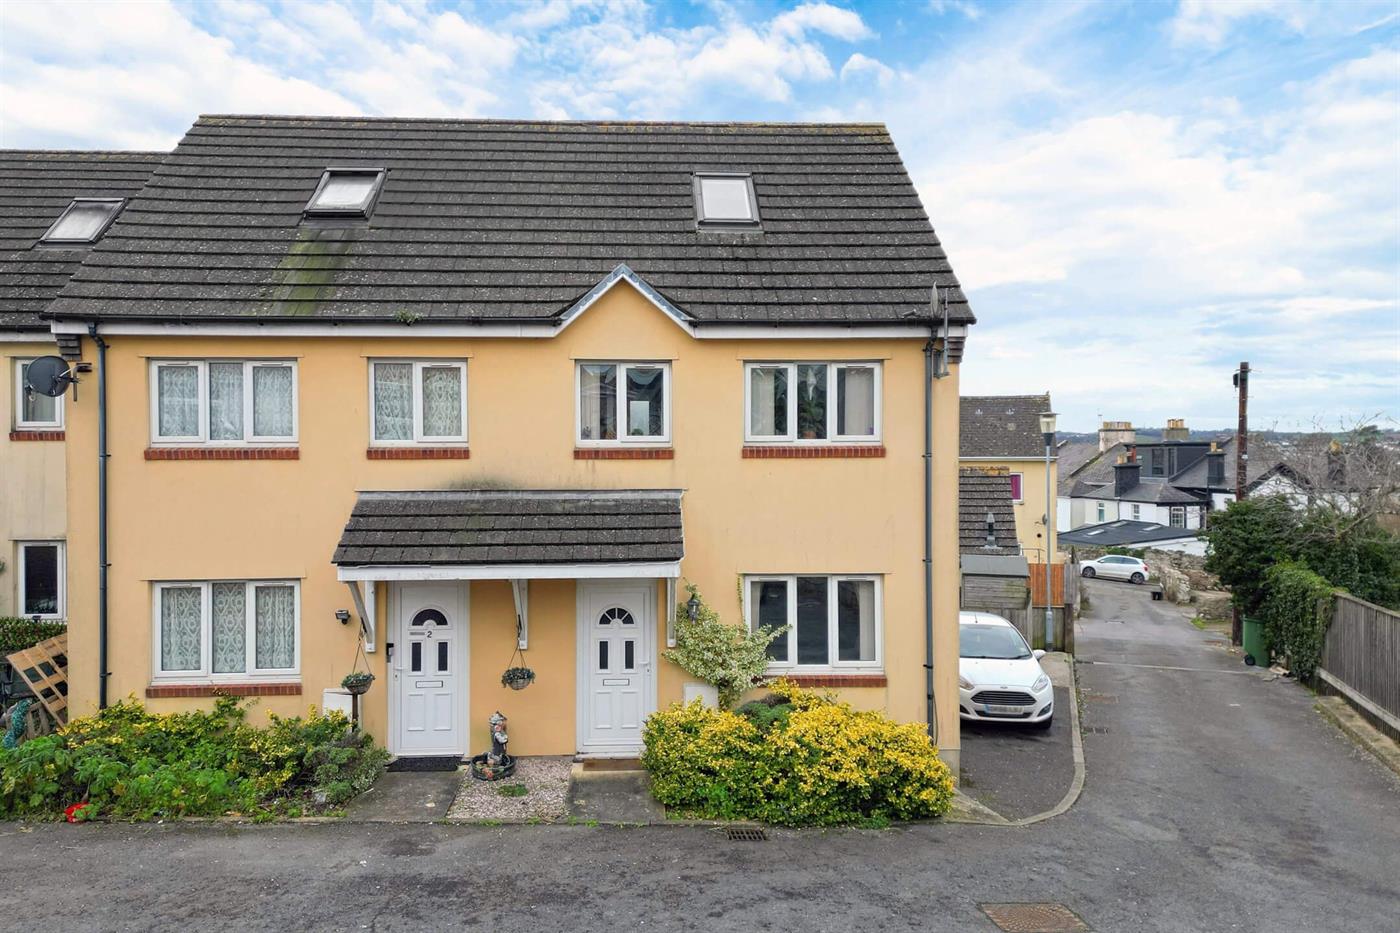 3 Bedroom End of Terrace House for Sale (Sold): Dunmere Court, Dunmere Rd, Torquay, TQ1 1LR